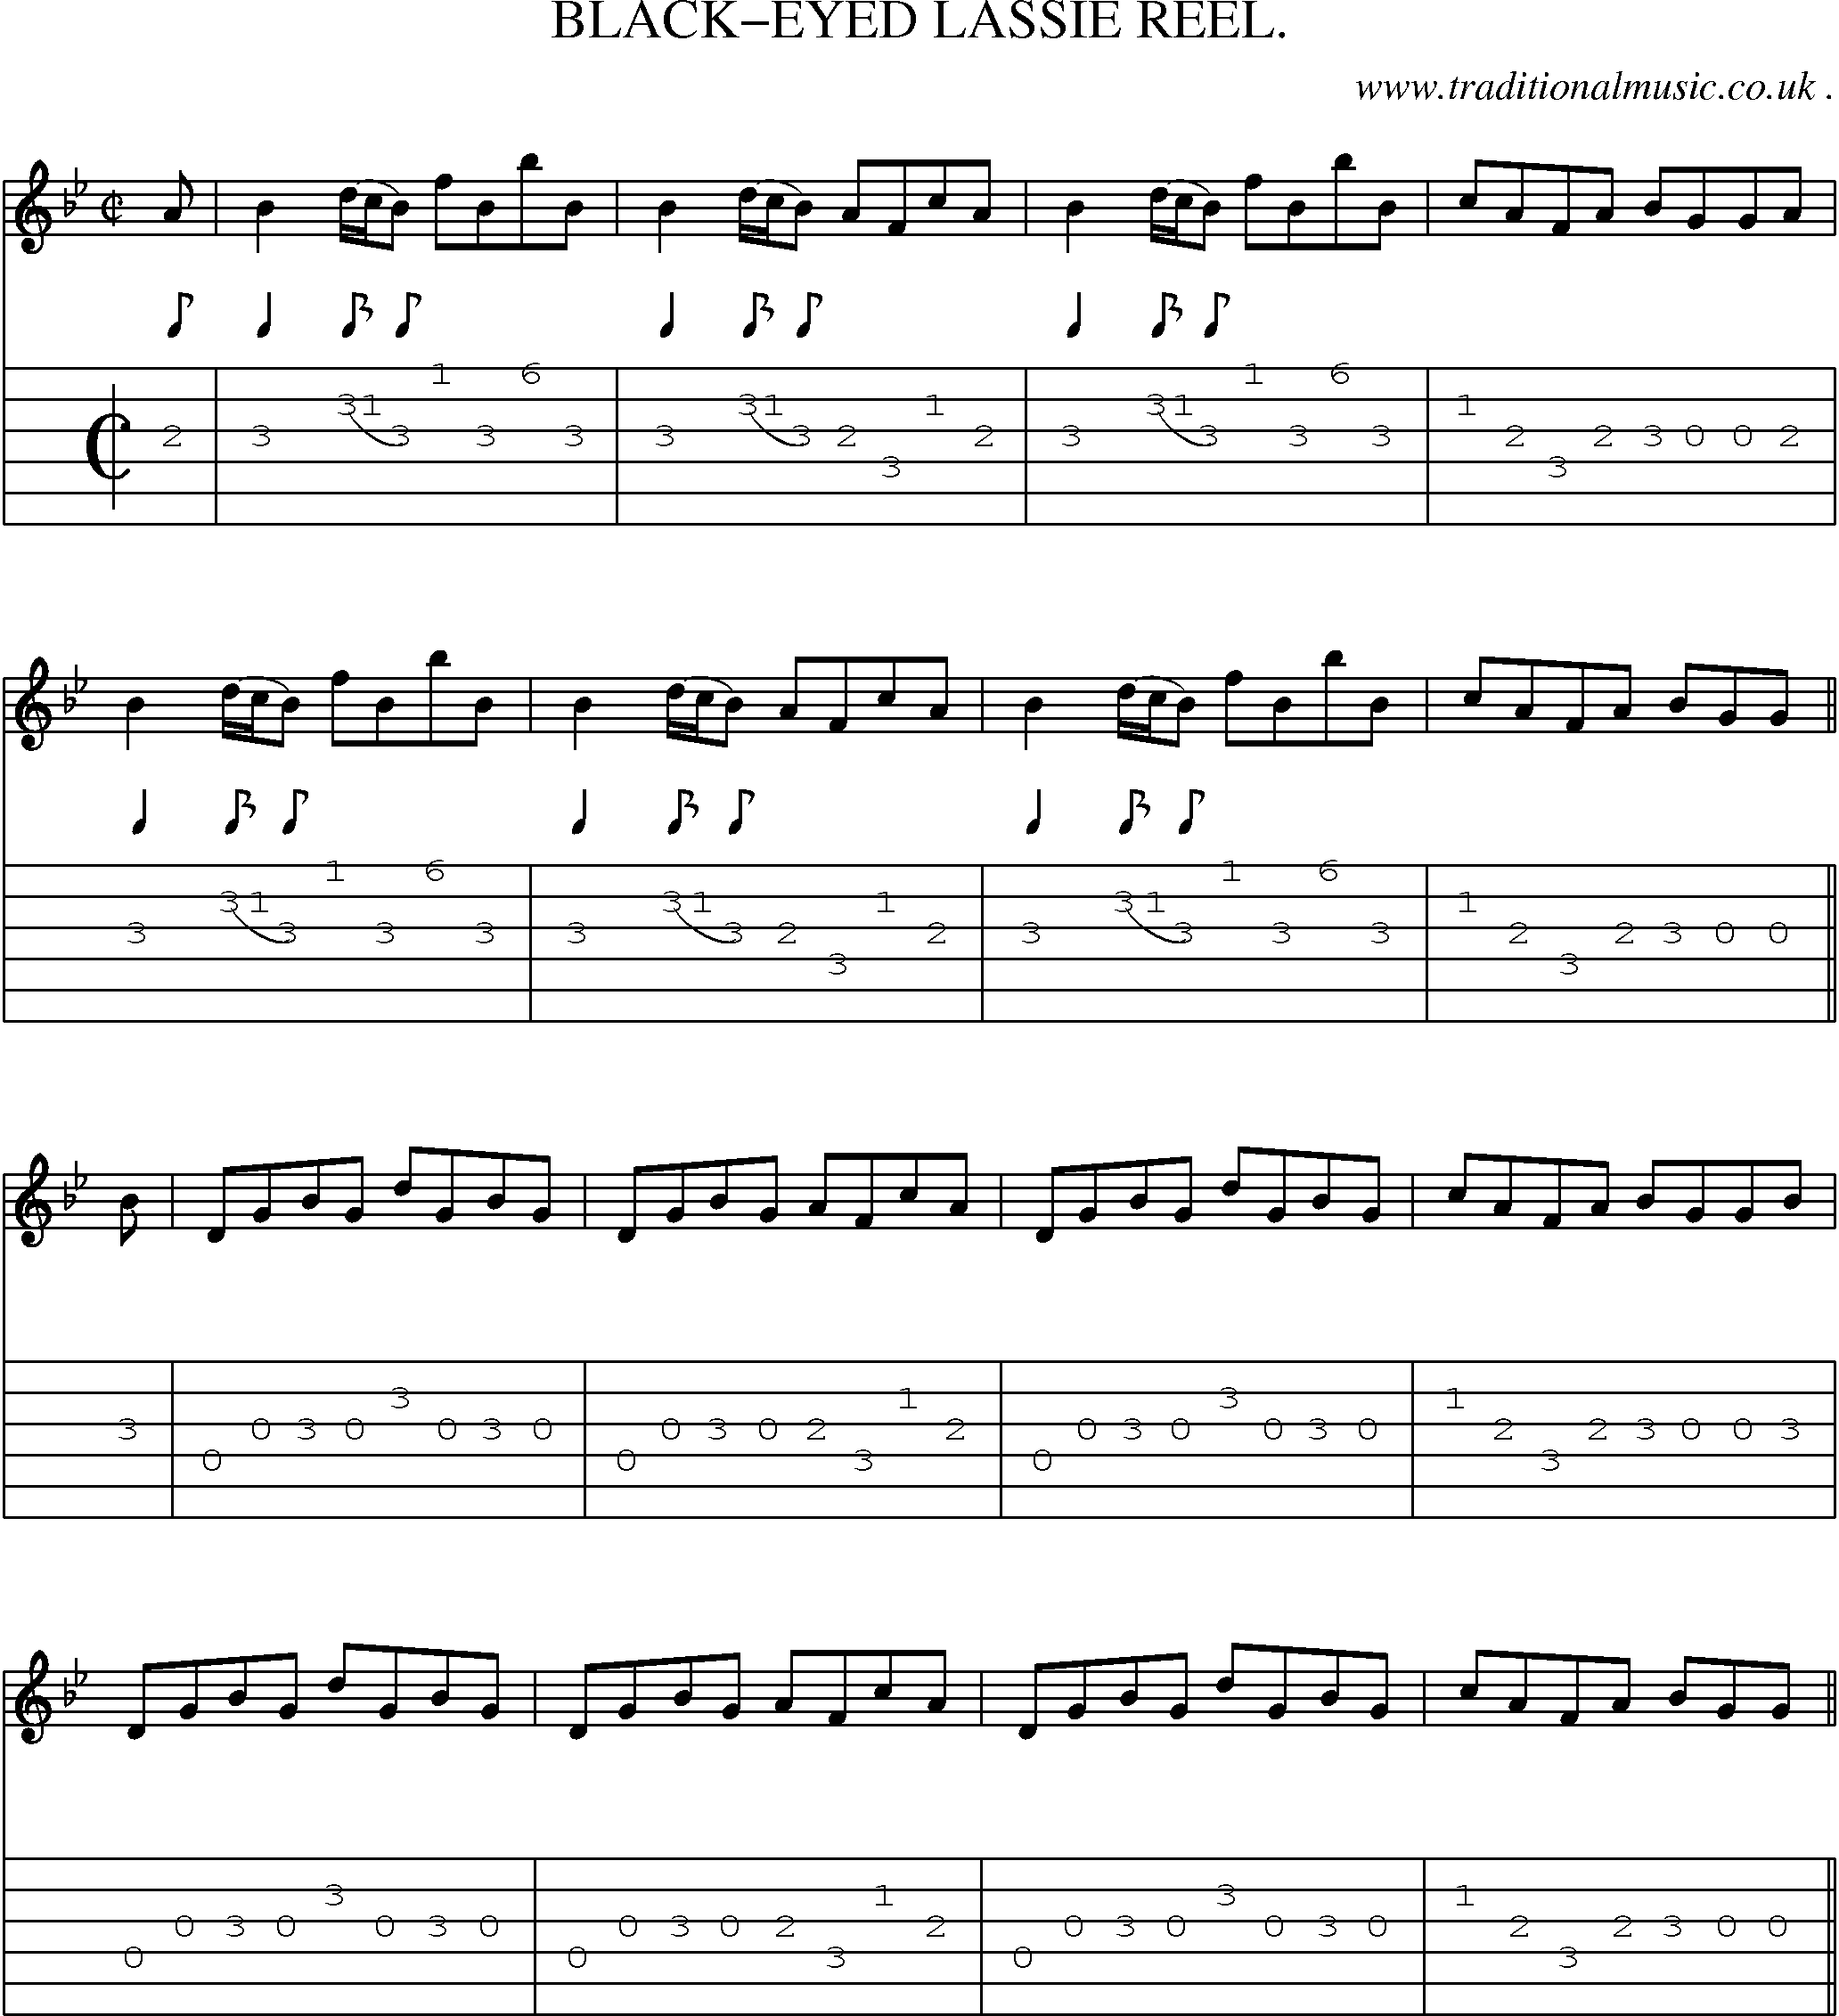 Sheet-Music and Guitar Tabs for Black-eyed Lassie Reel